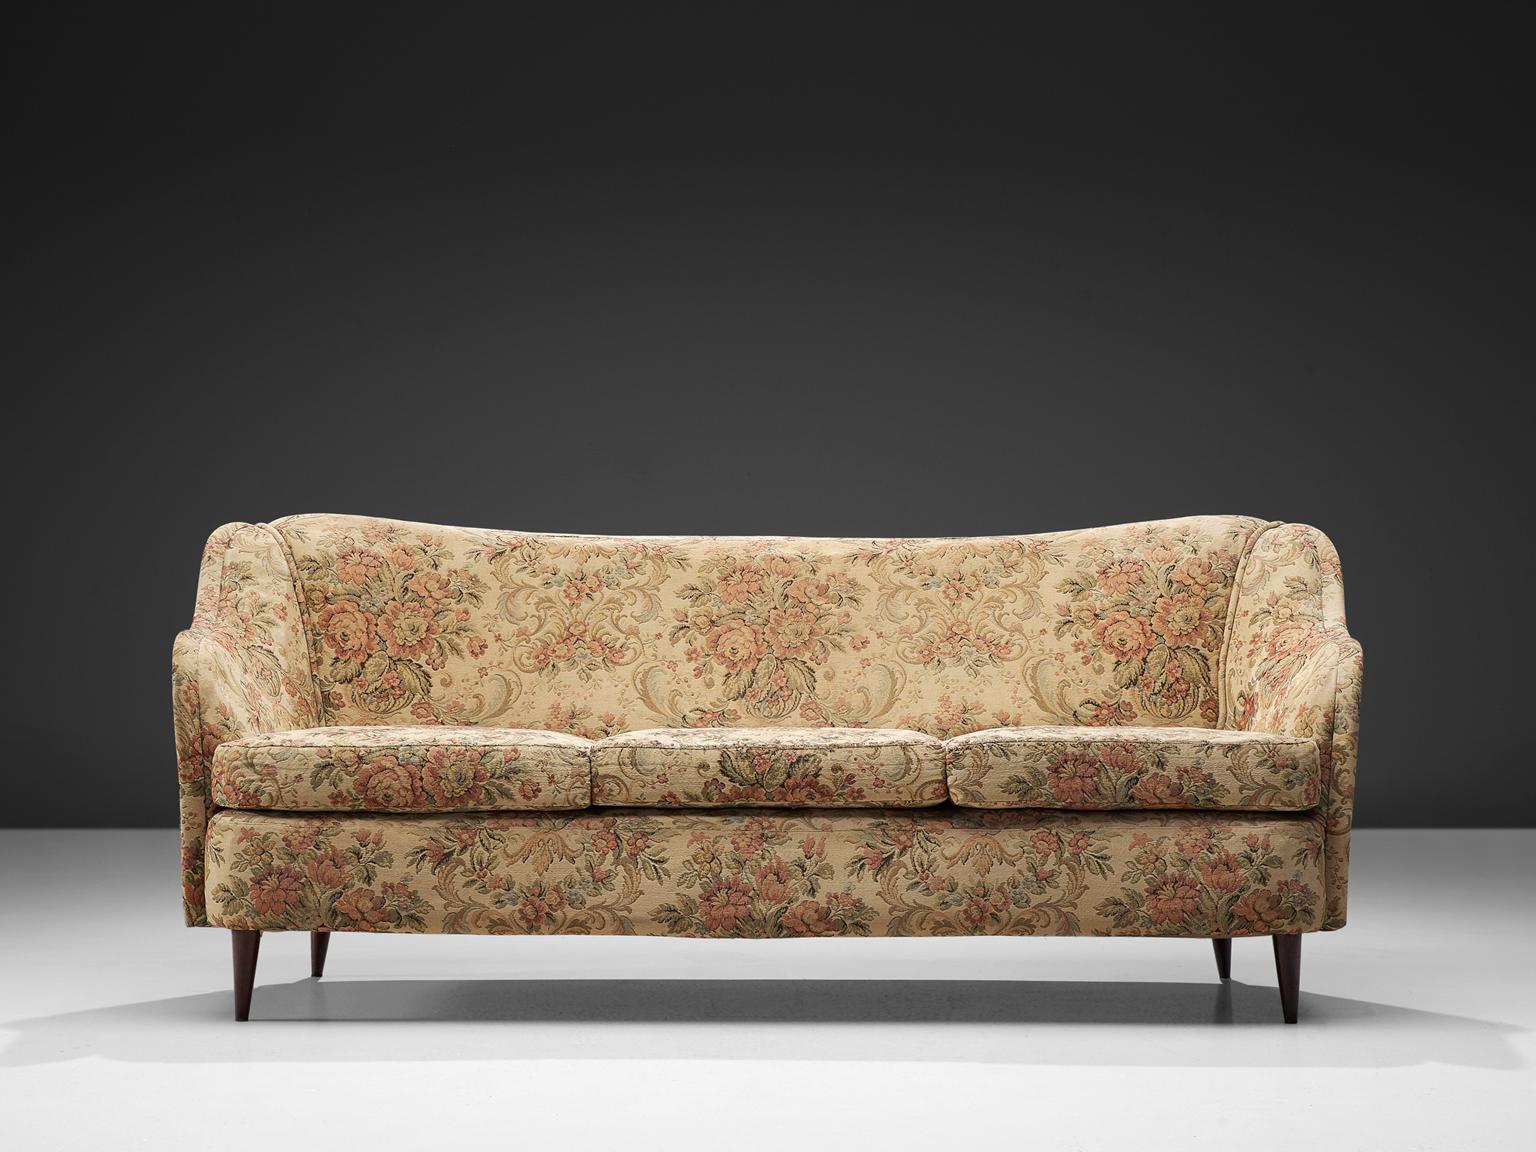 In the manner of Gio Ponti, three-seat sofa, floral fabric and wood, Italy, 1940s.

Elegant and feminine sofa designed in the style and time of Gio Ponti with original upholstery. This sofa features a curved, high back rest. The tapered wooden